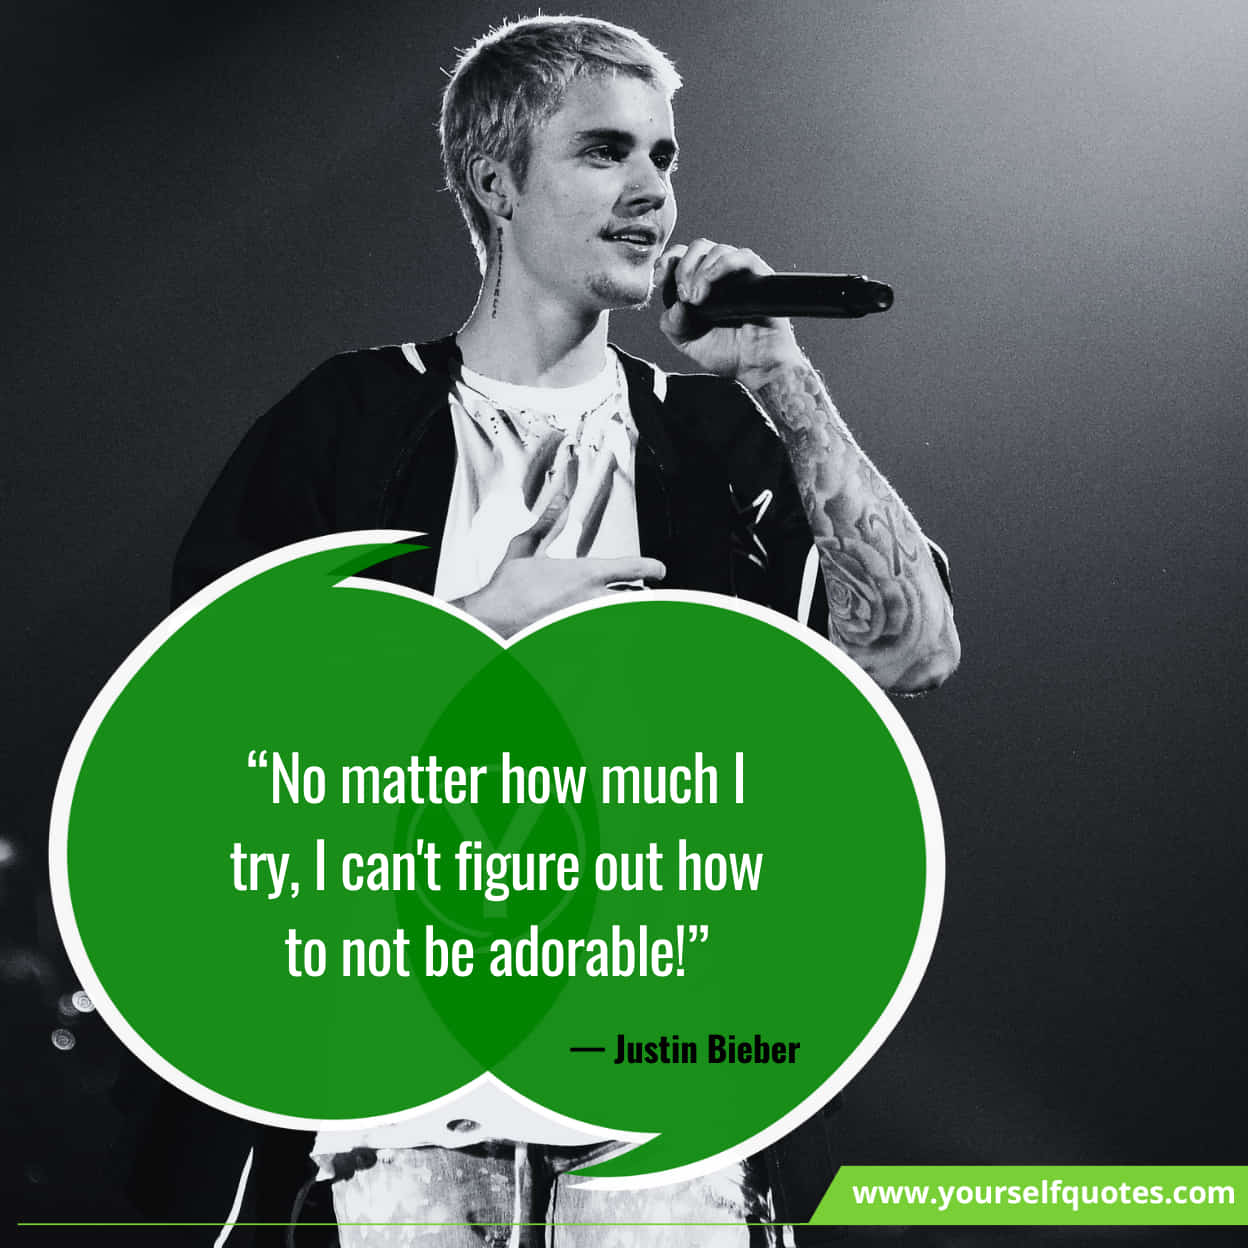 Best Justin Bieber Quotes On Music